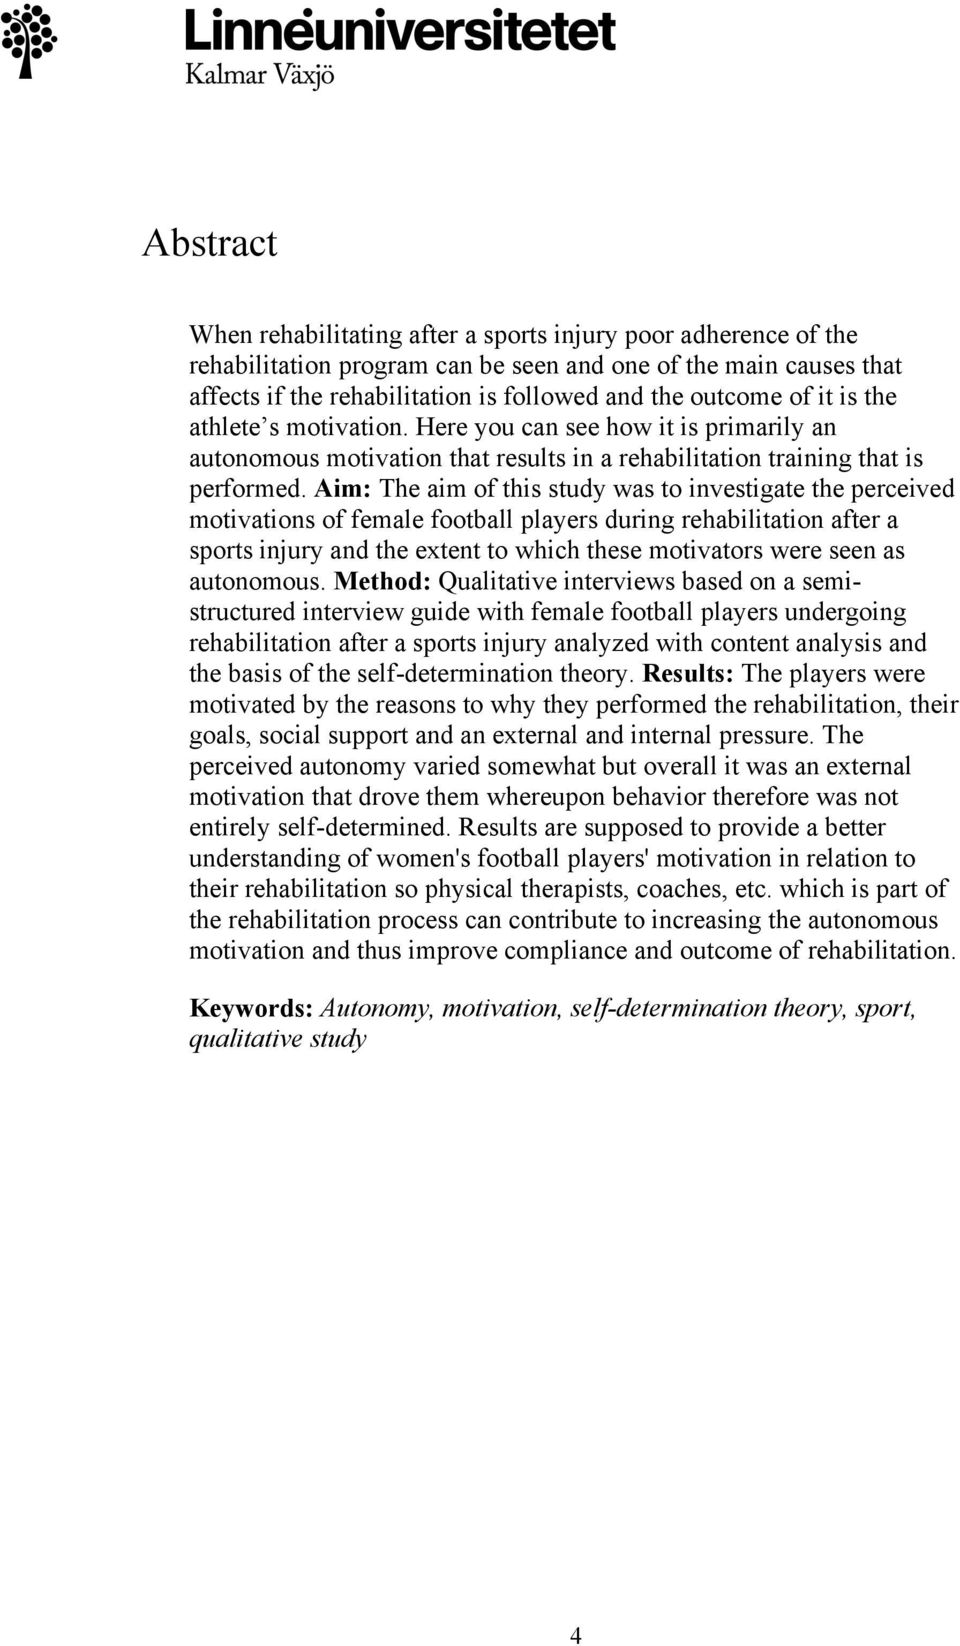 Aim: The aim of this study was to investigate the perceived motivations of female football players during rehabilitation after a sports injury and the extent to which these motivators were seen as